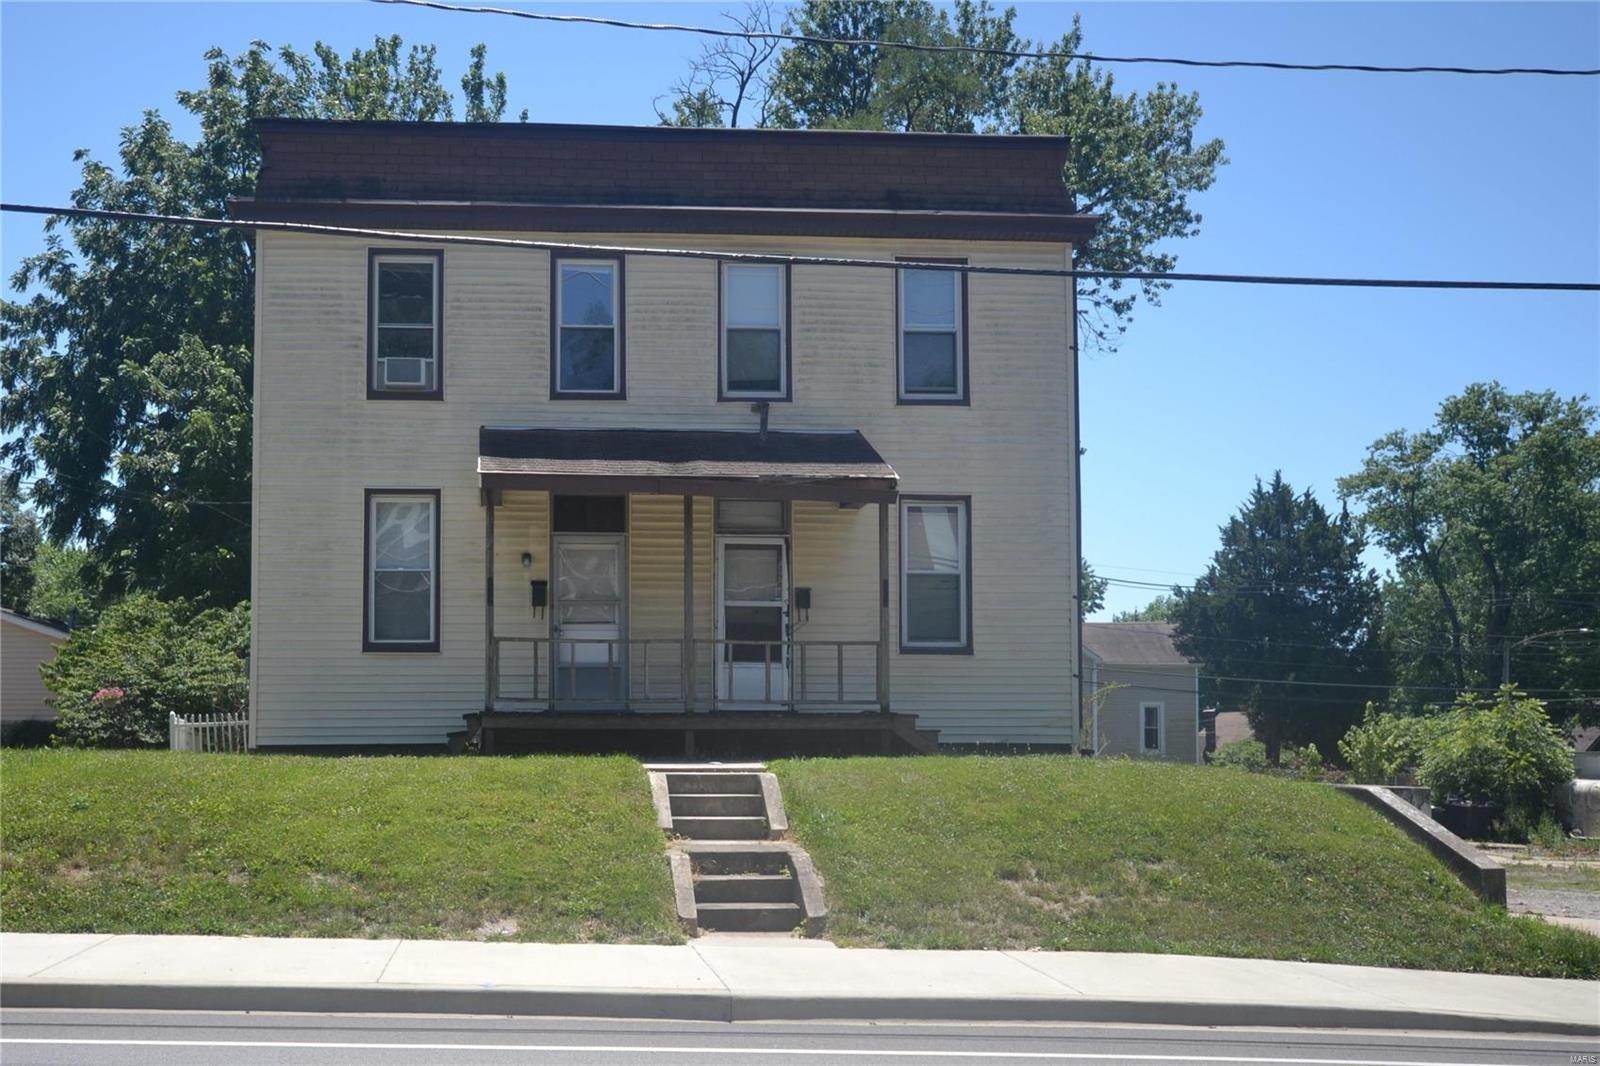 Property for Sale at 812 Centerville Avenue Belleville, Illinois 62220 United States